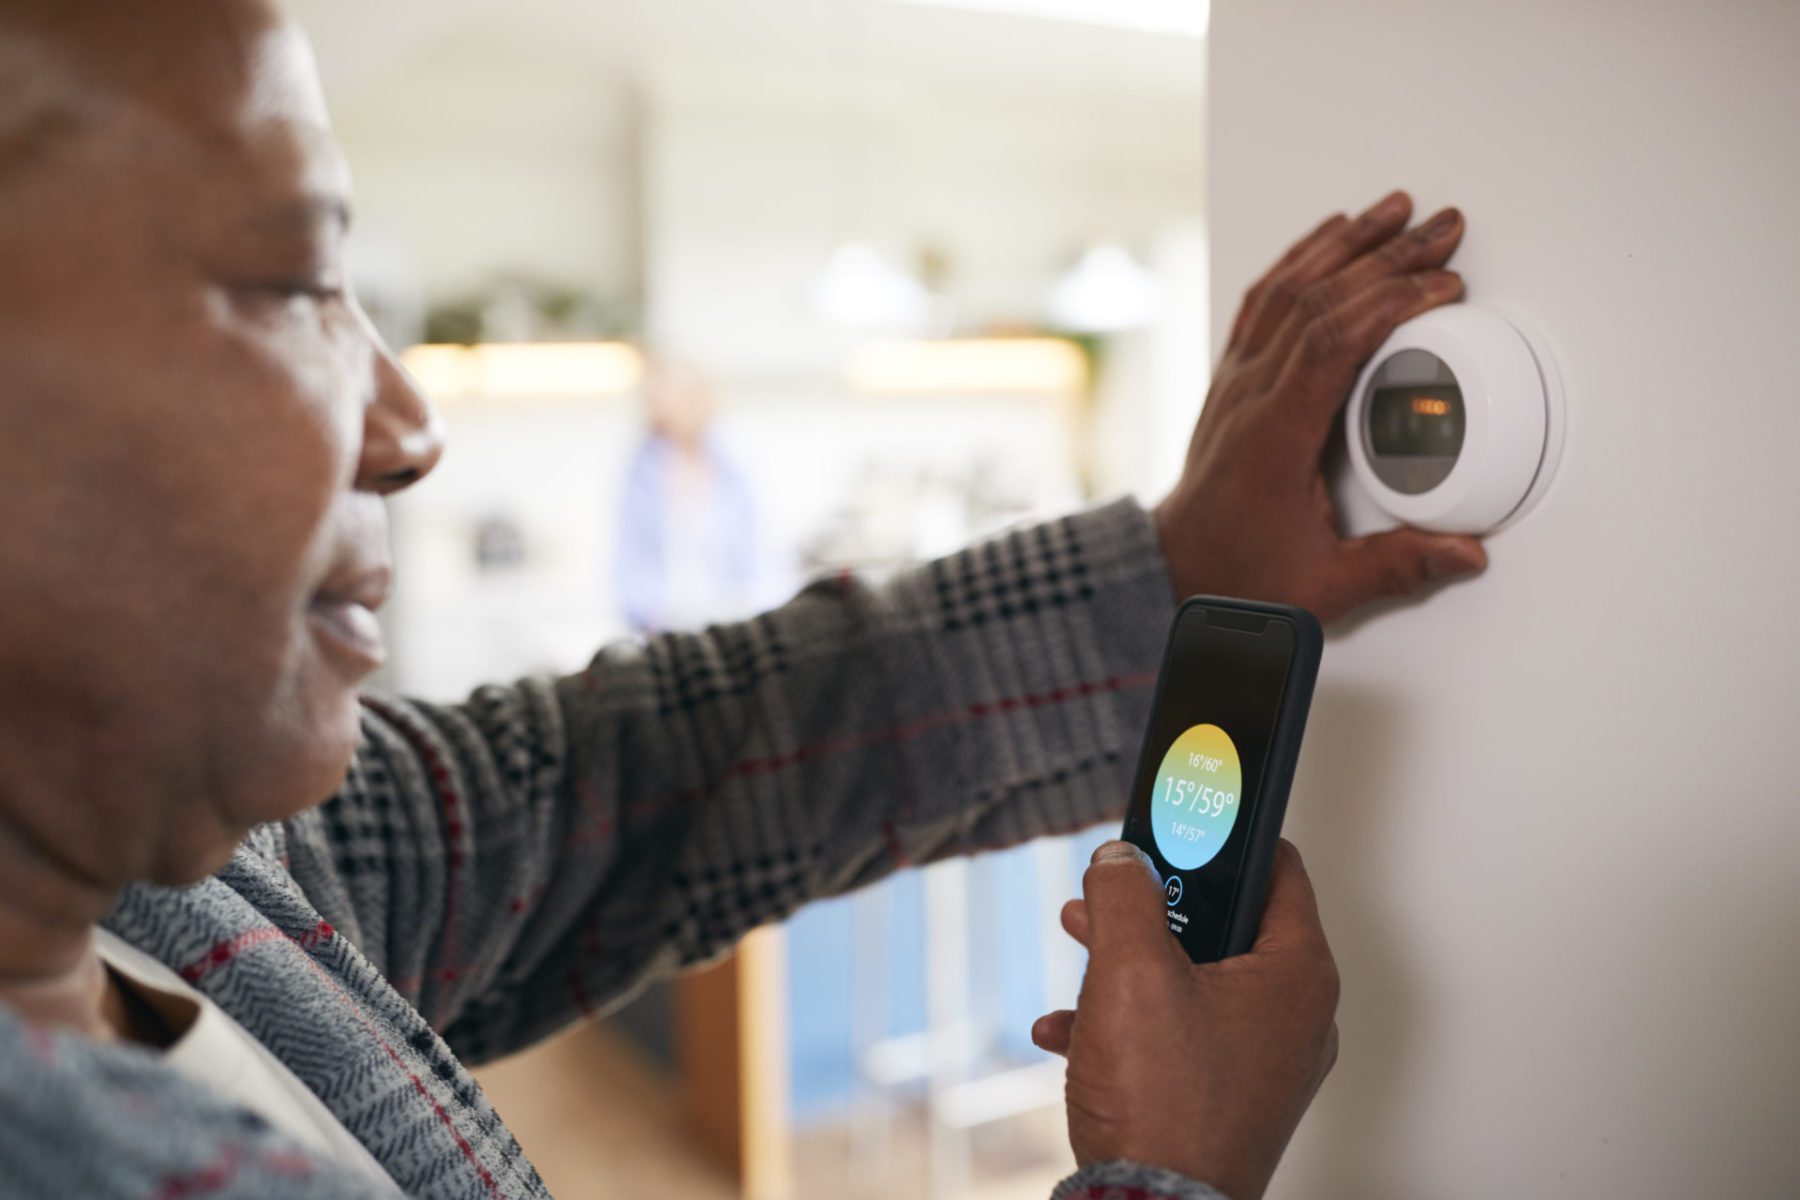 Man Using App On Phone To Control Smart Thermostat At Home